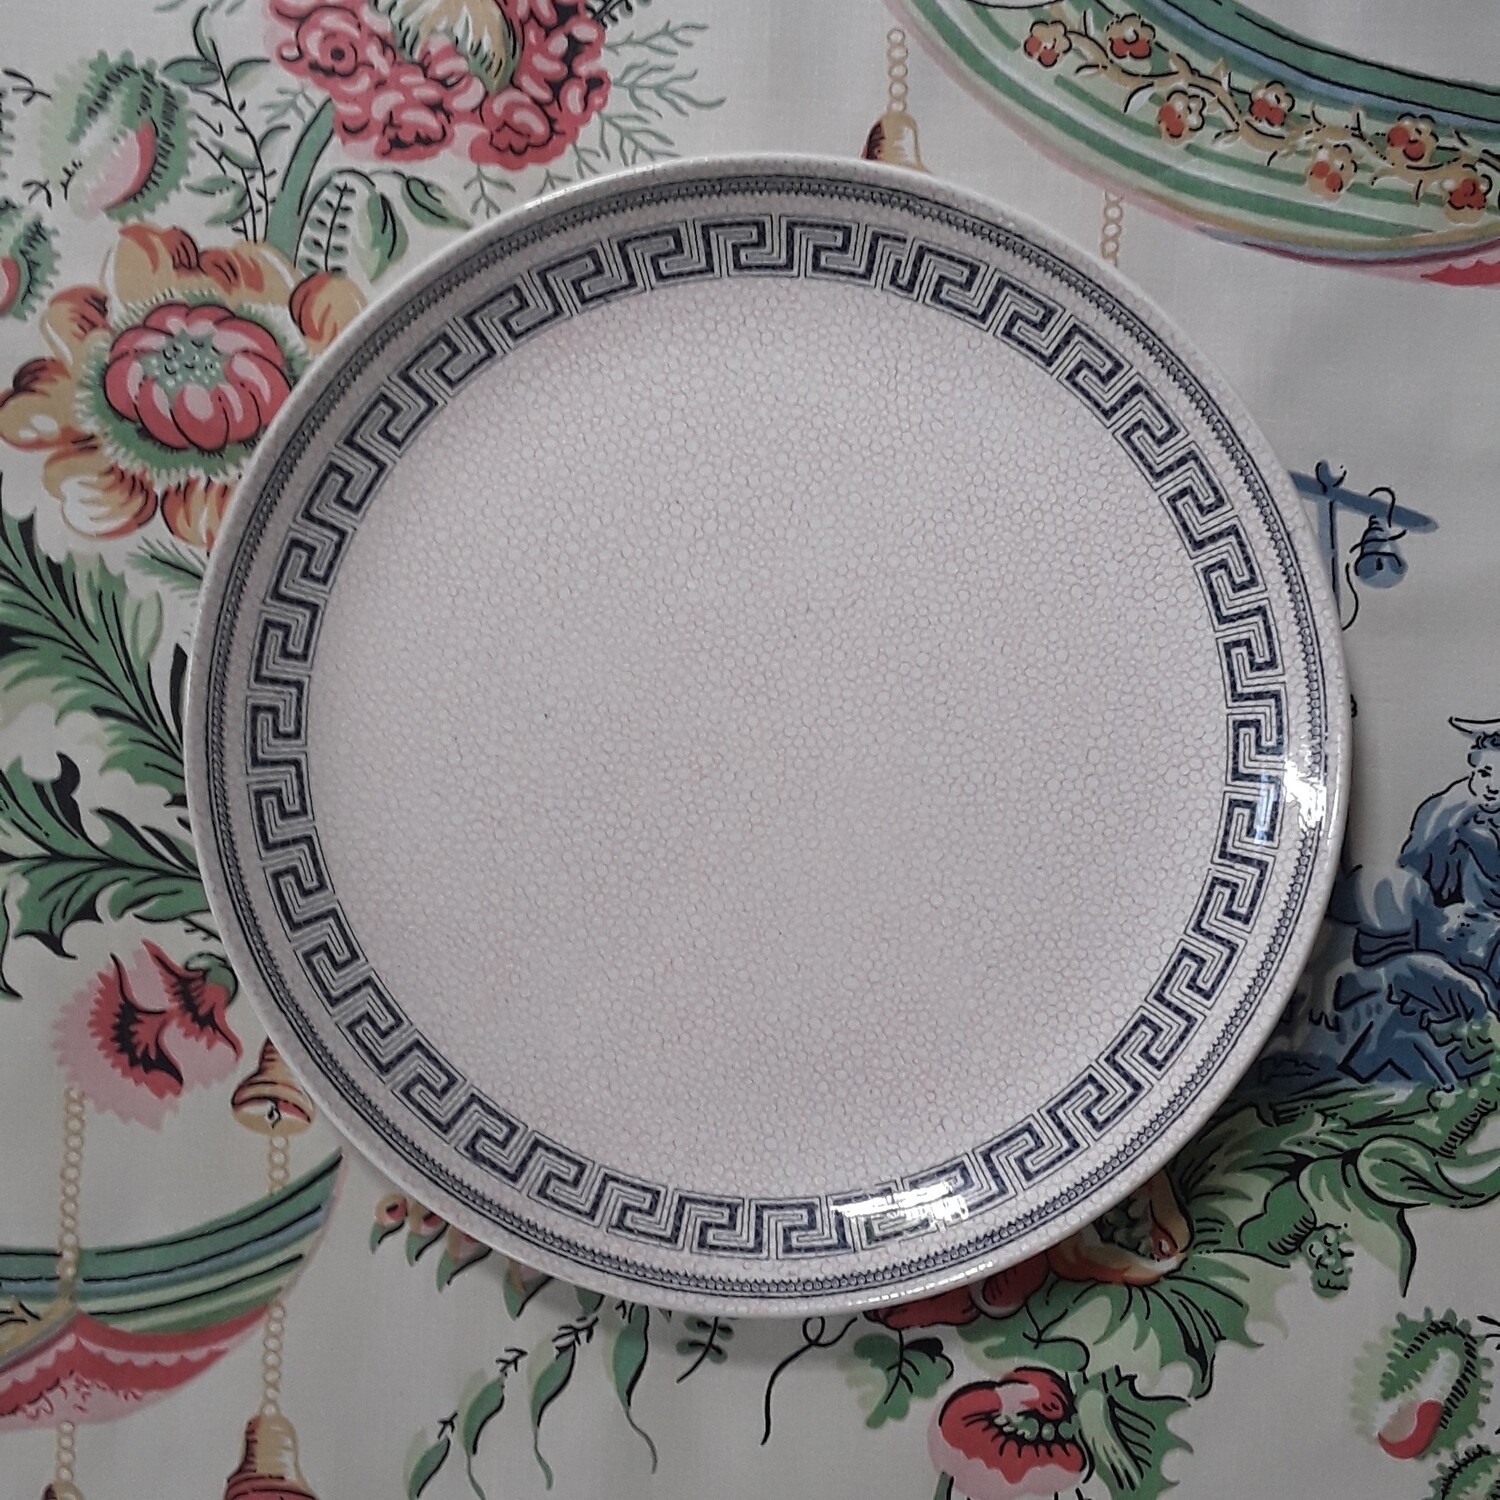 Vintage Spode Copeland "Piazza" Plate